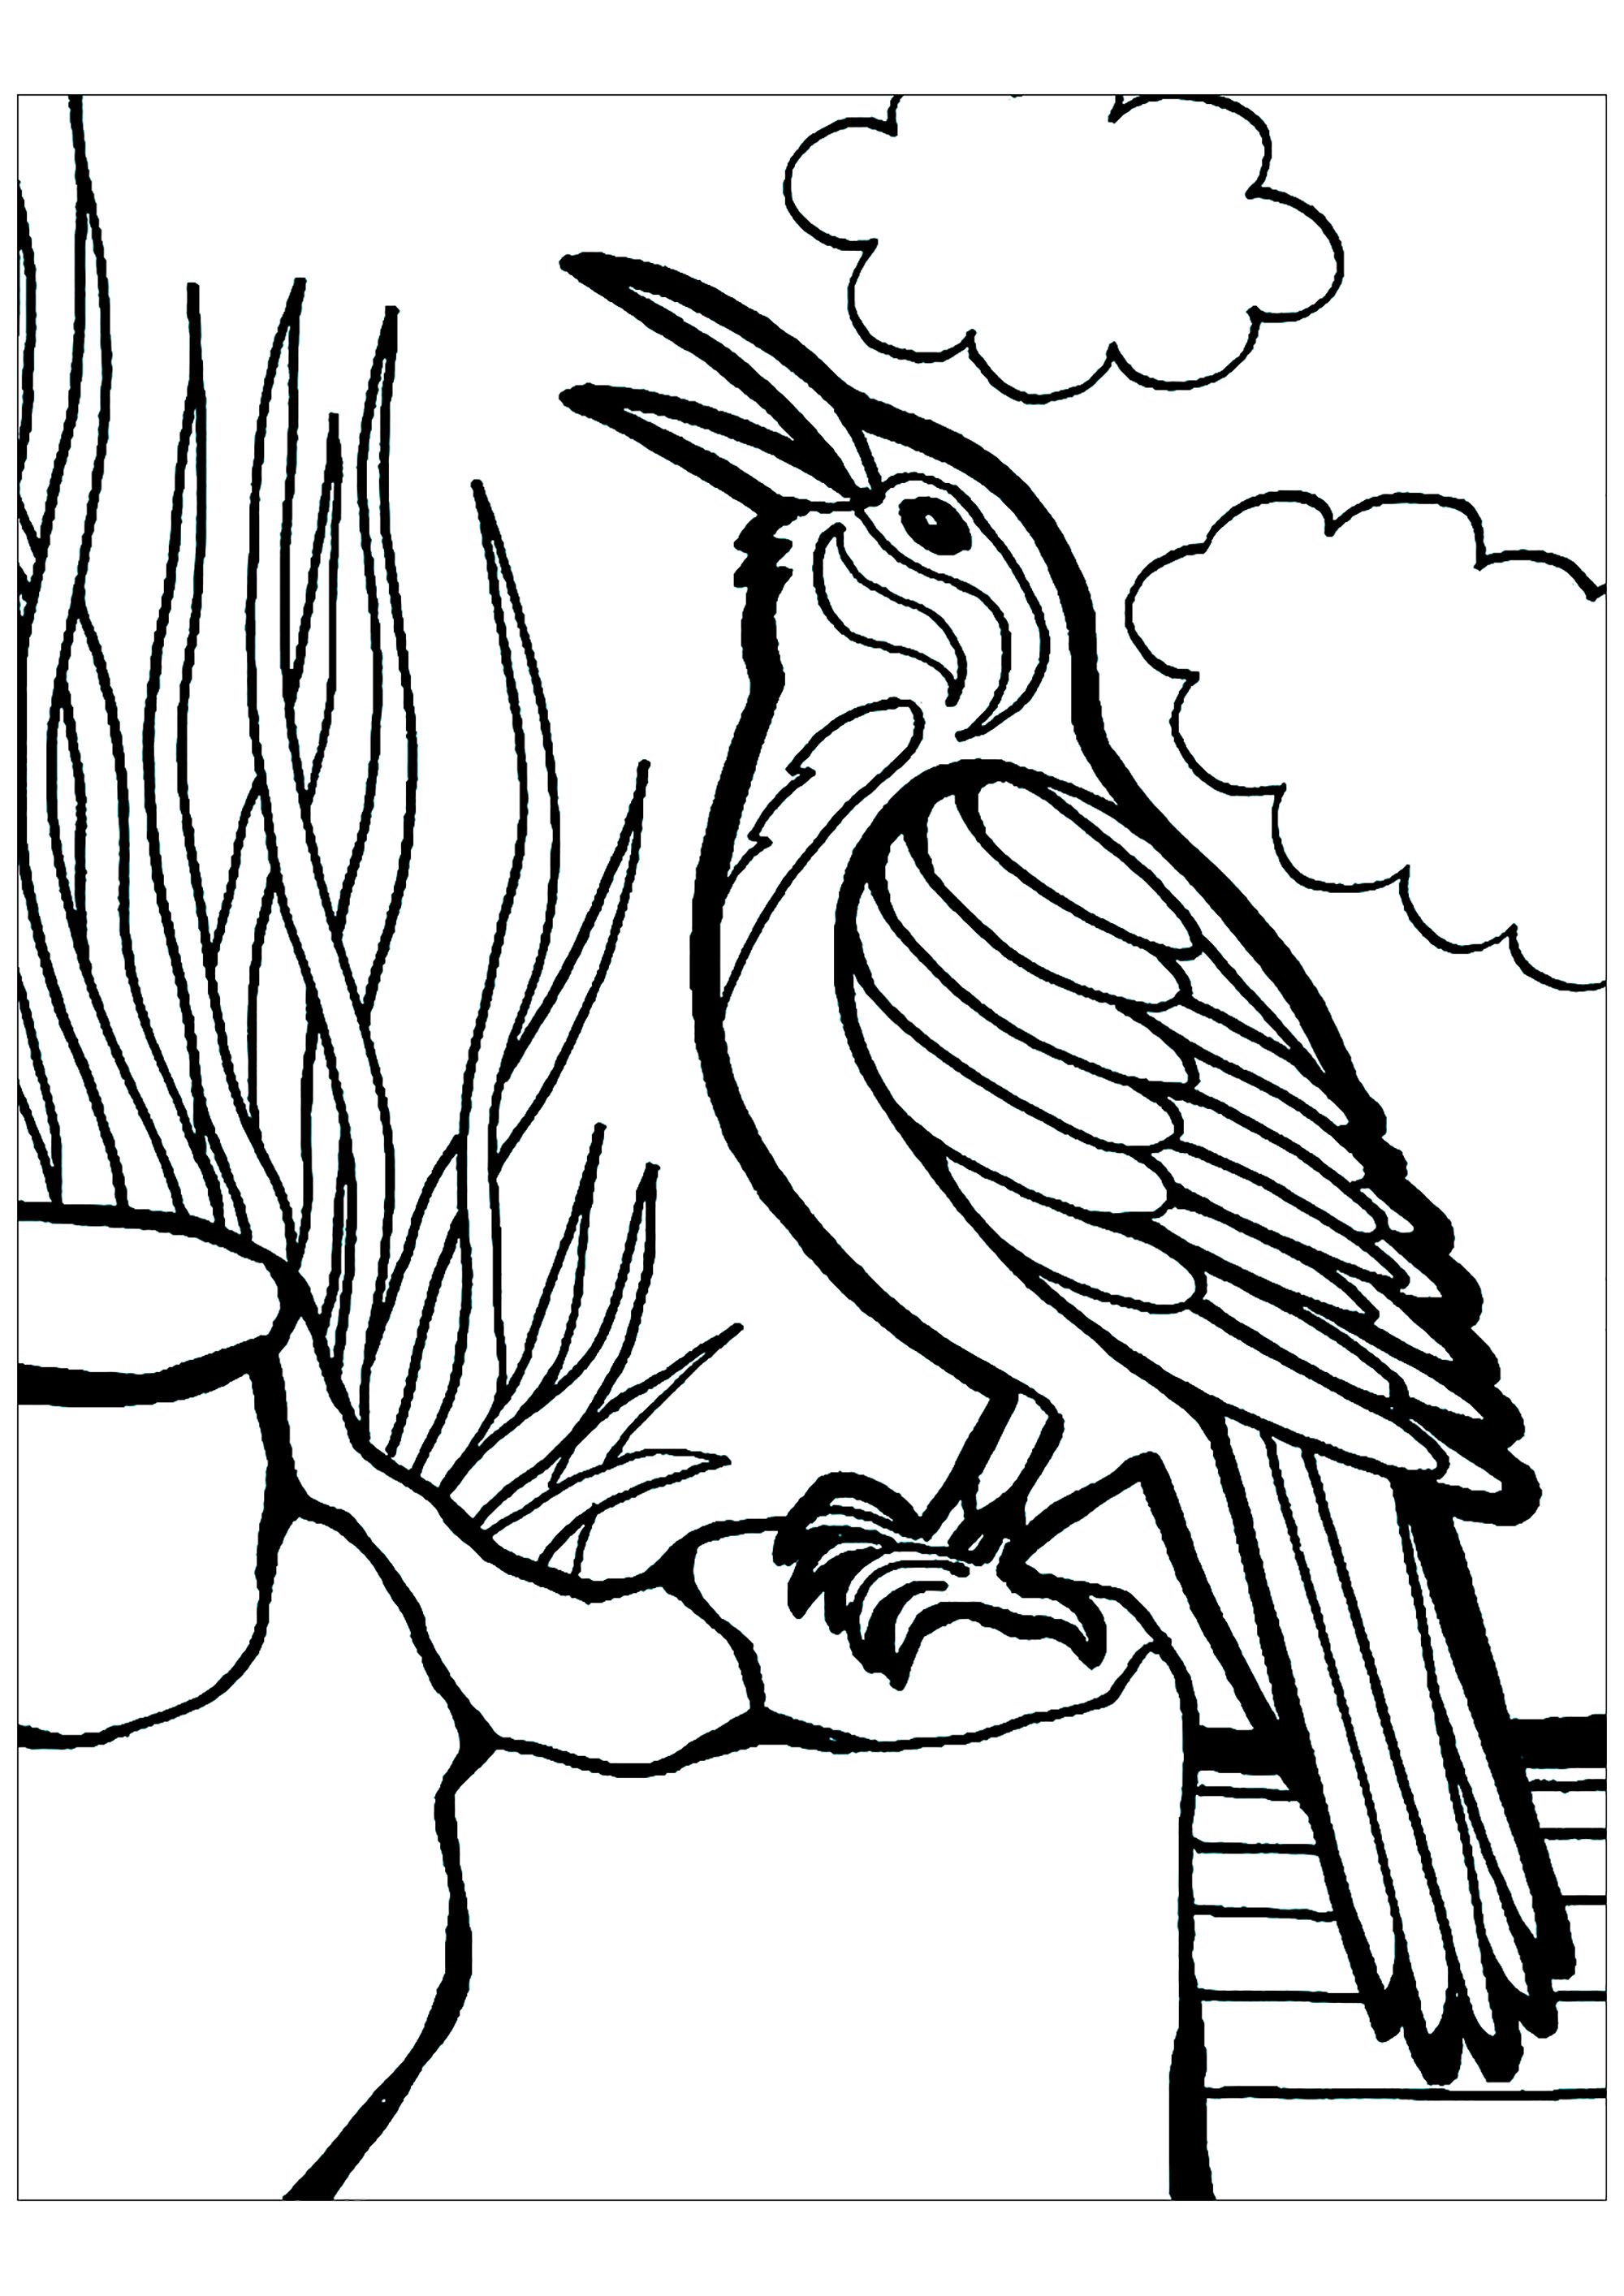 Download Birds to print for free - Birds Kids Coloring Pages